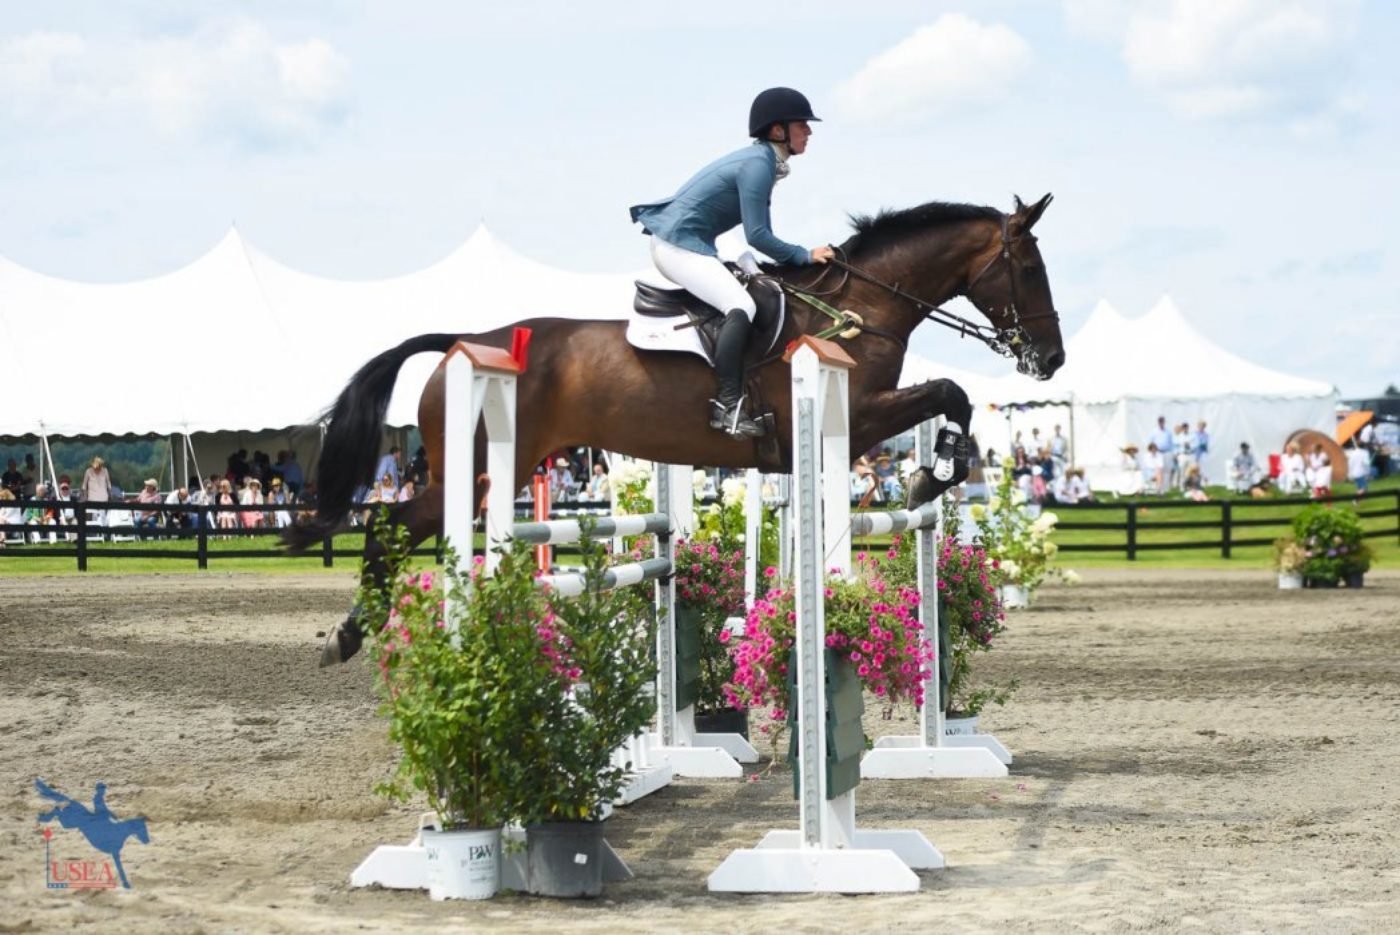 14th - Jenny Caras and Fernhill Fortitude - 47.1